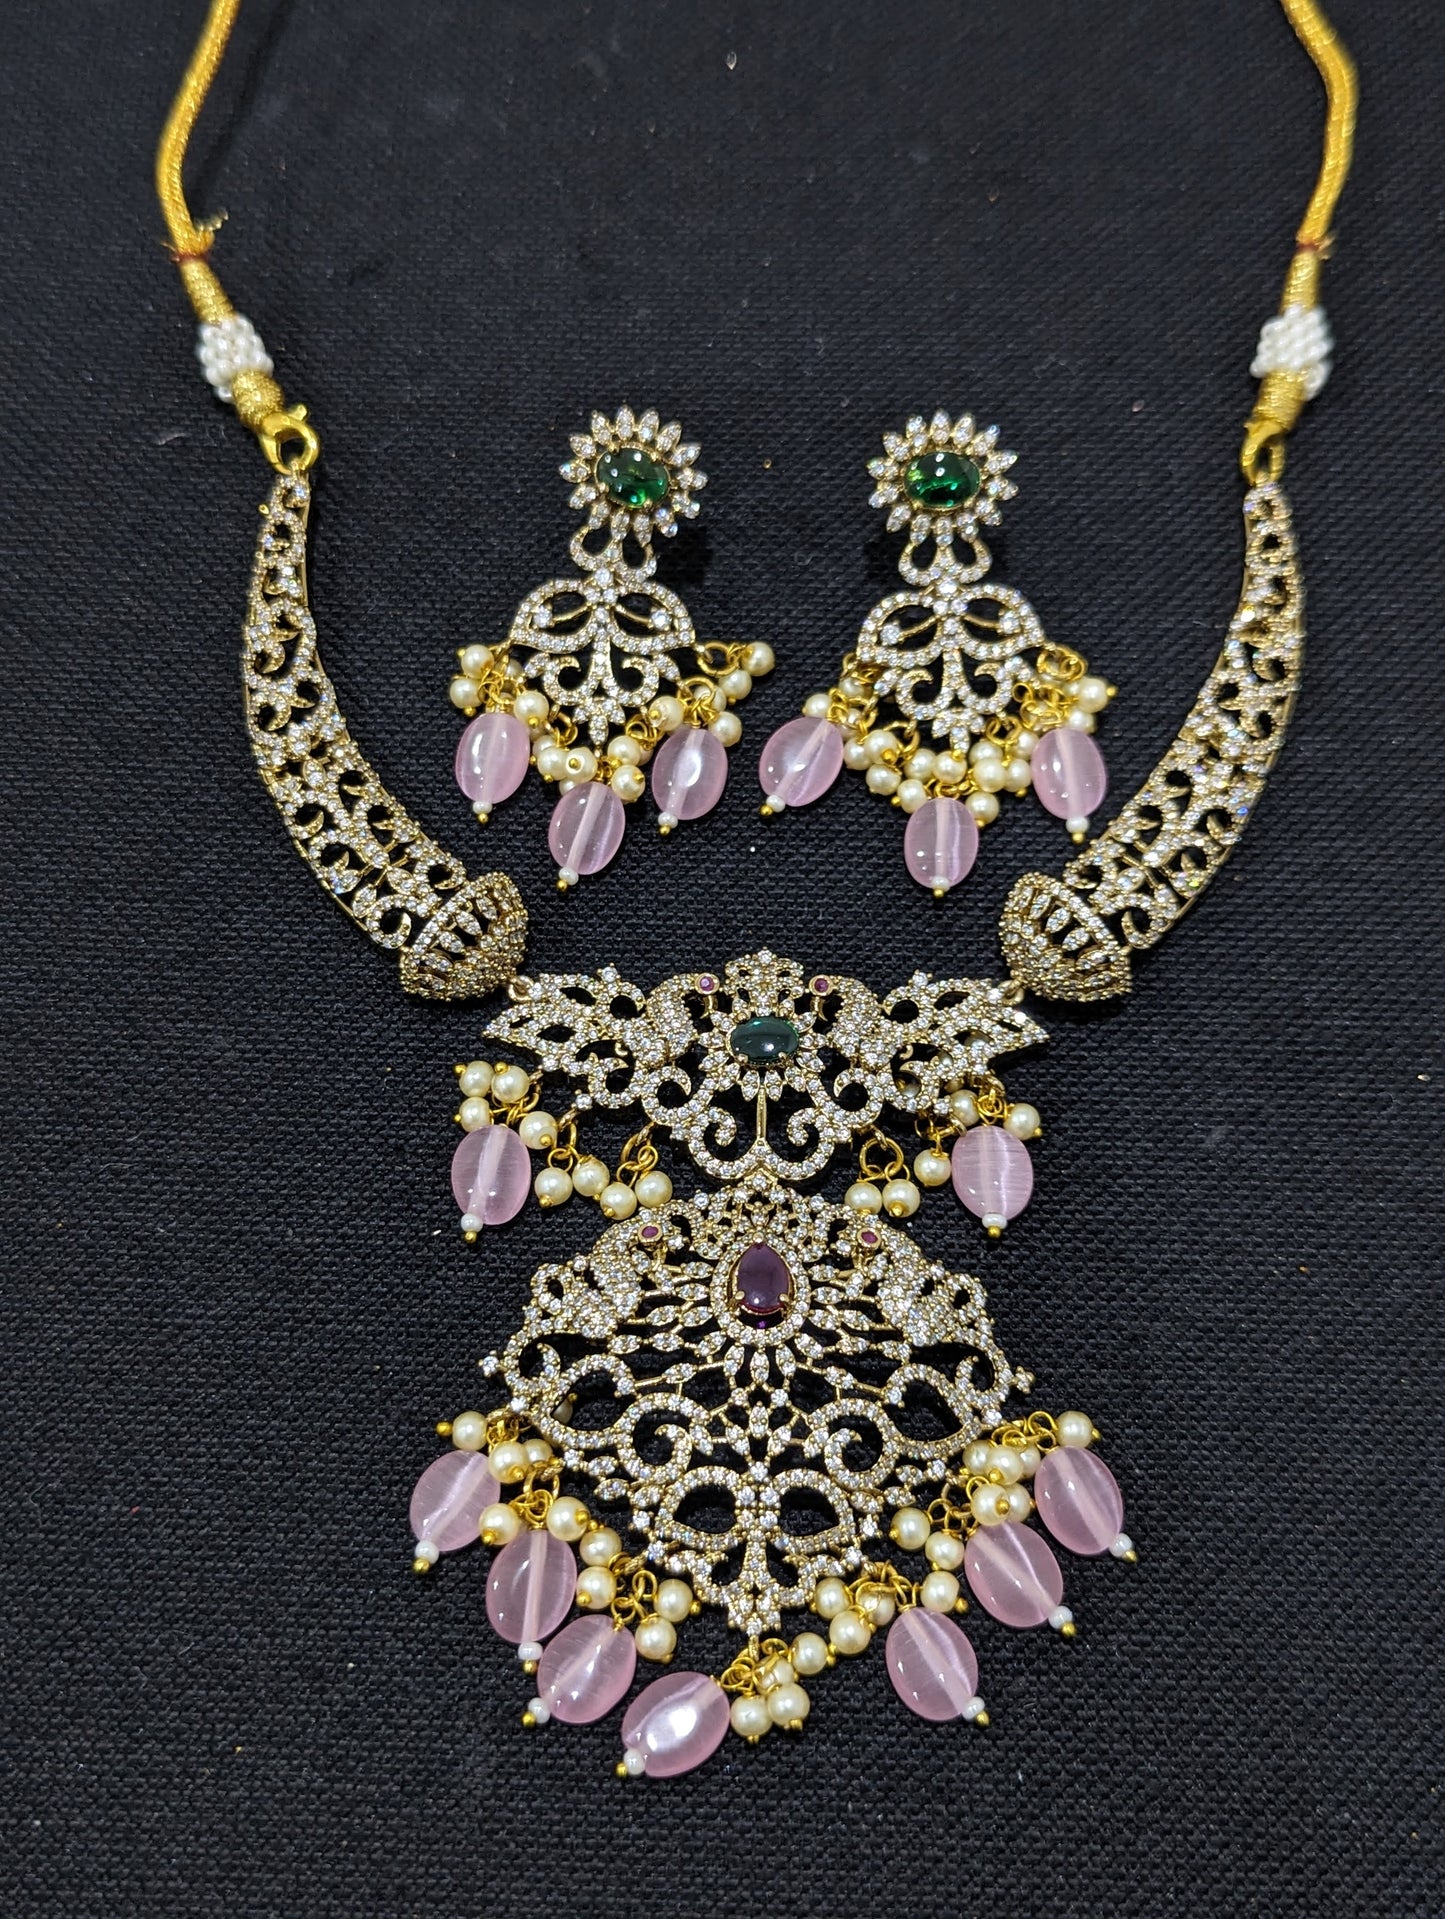 Pastel pink Adigai style Choker Necklace and Earrings set